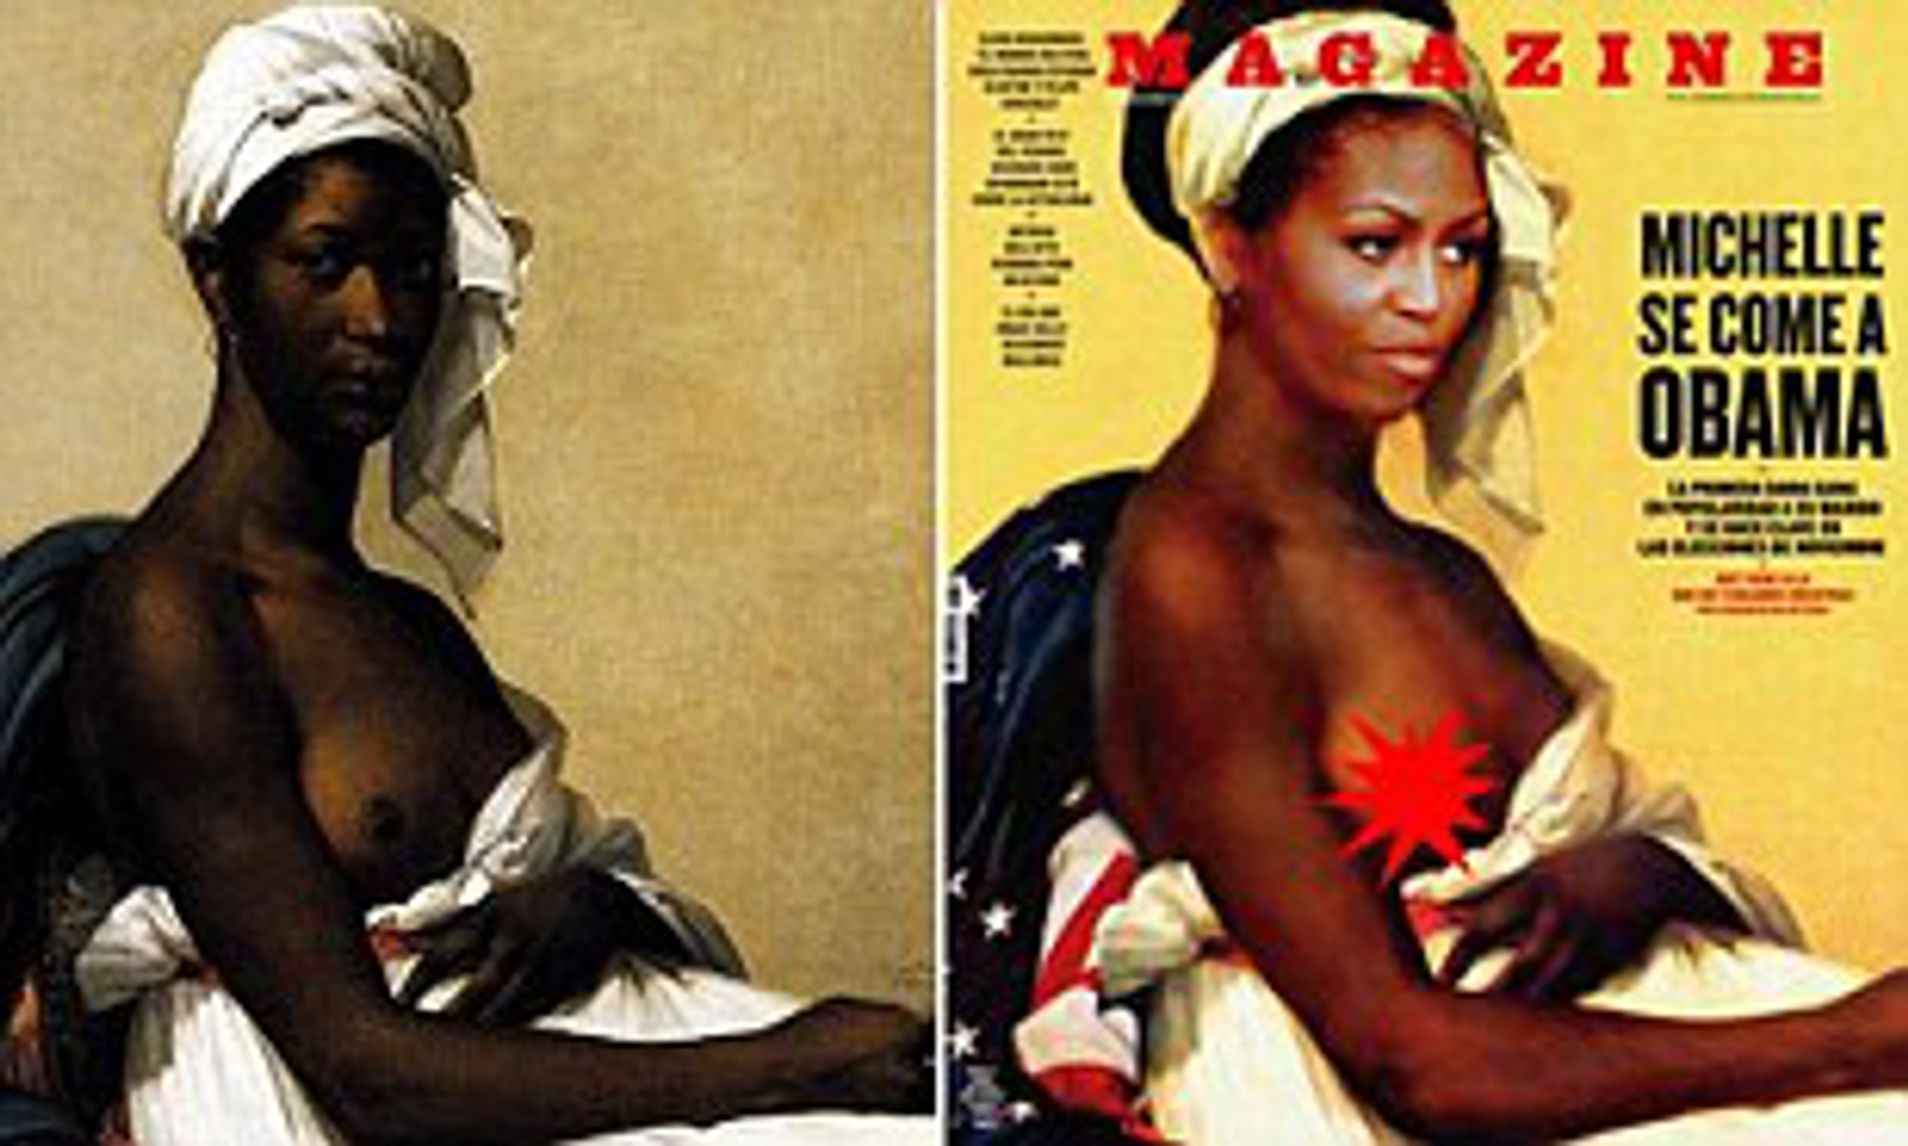 bryan spivey recommends michelle obama nude pictures pic